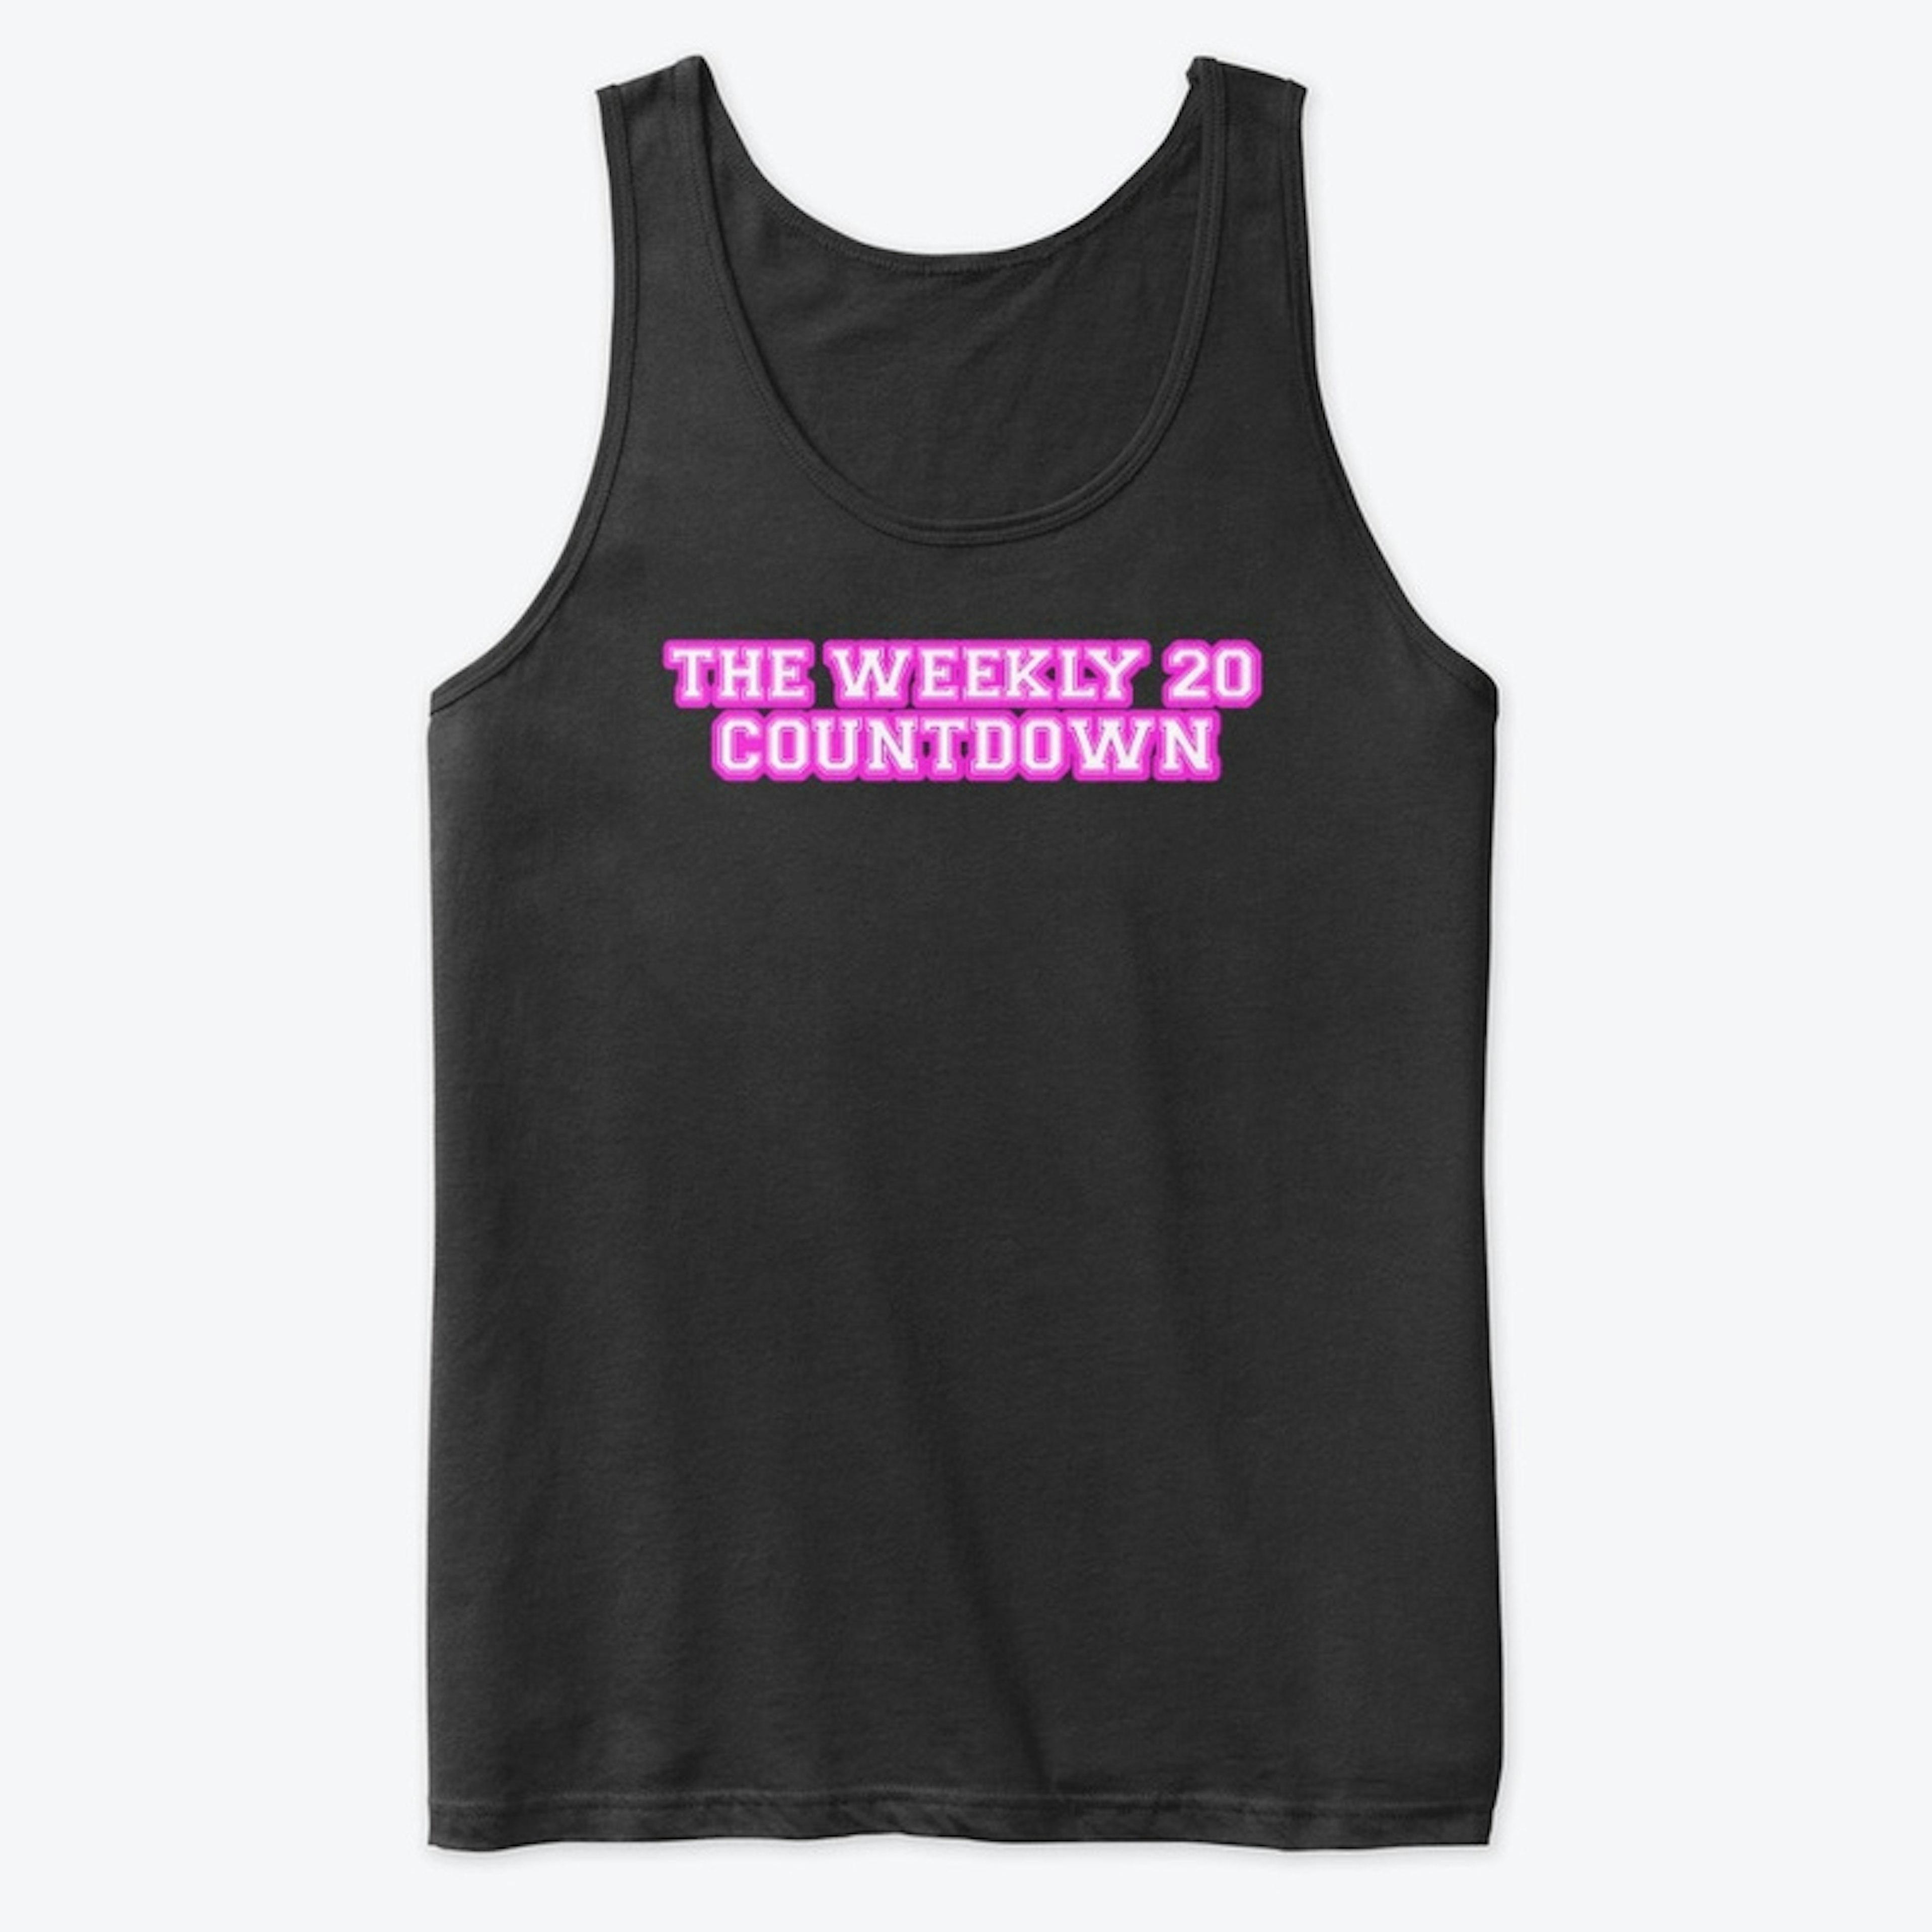 THE WEEKLY 20 COUNTDOWN SHIRT